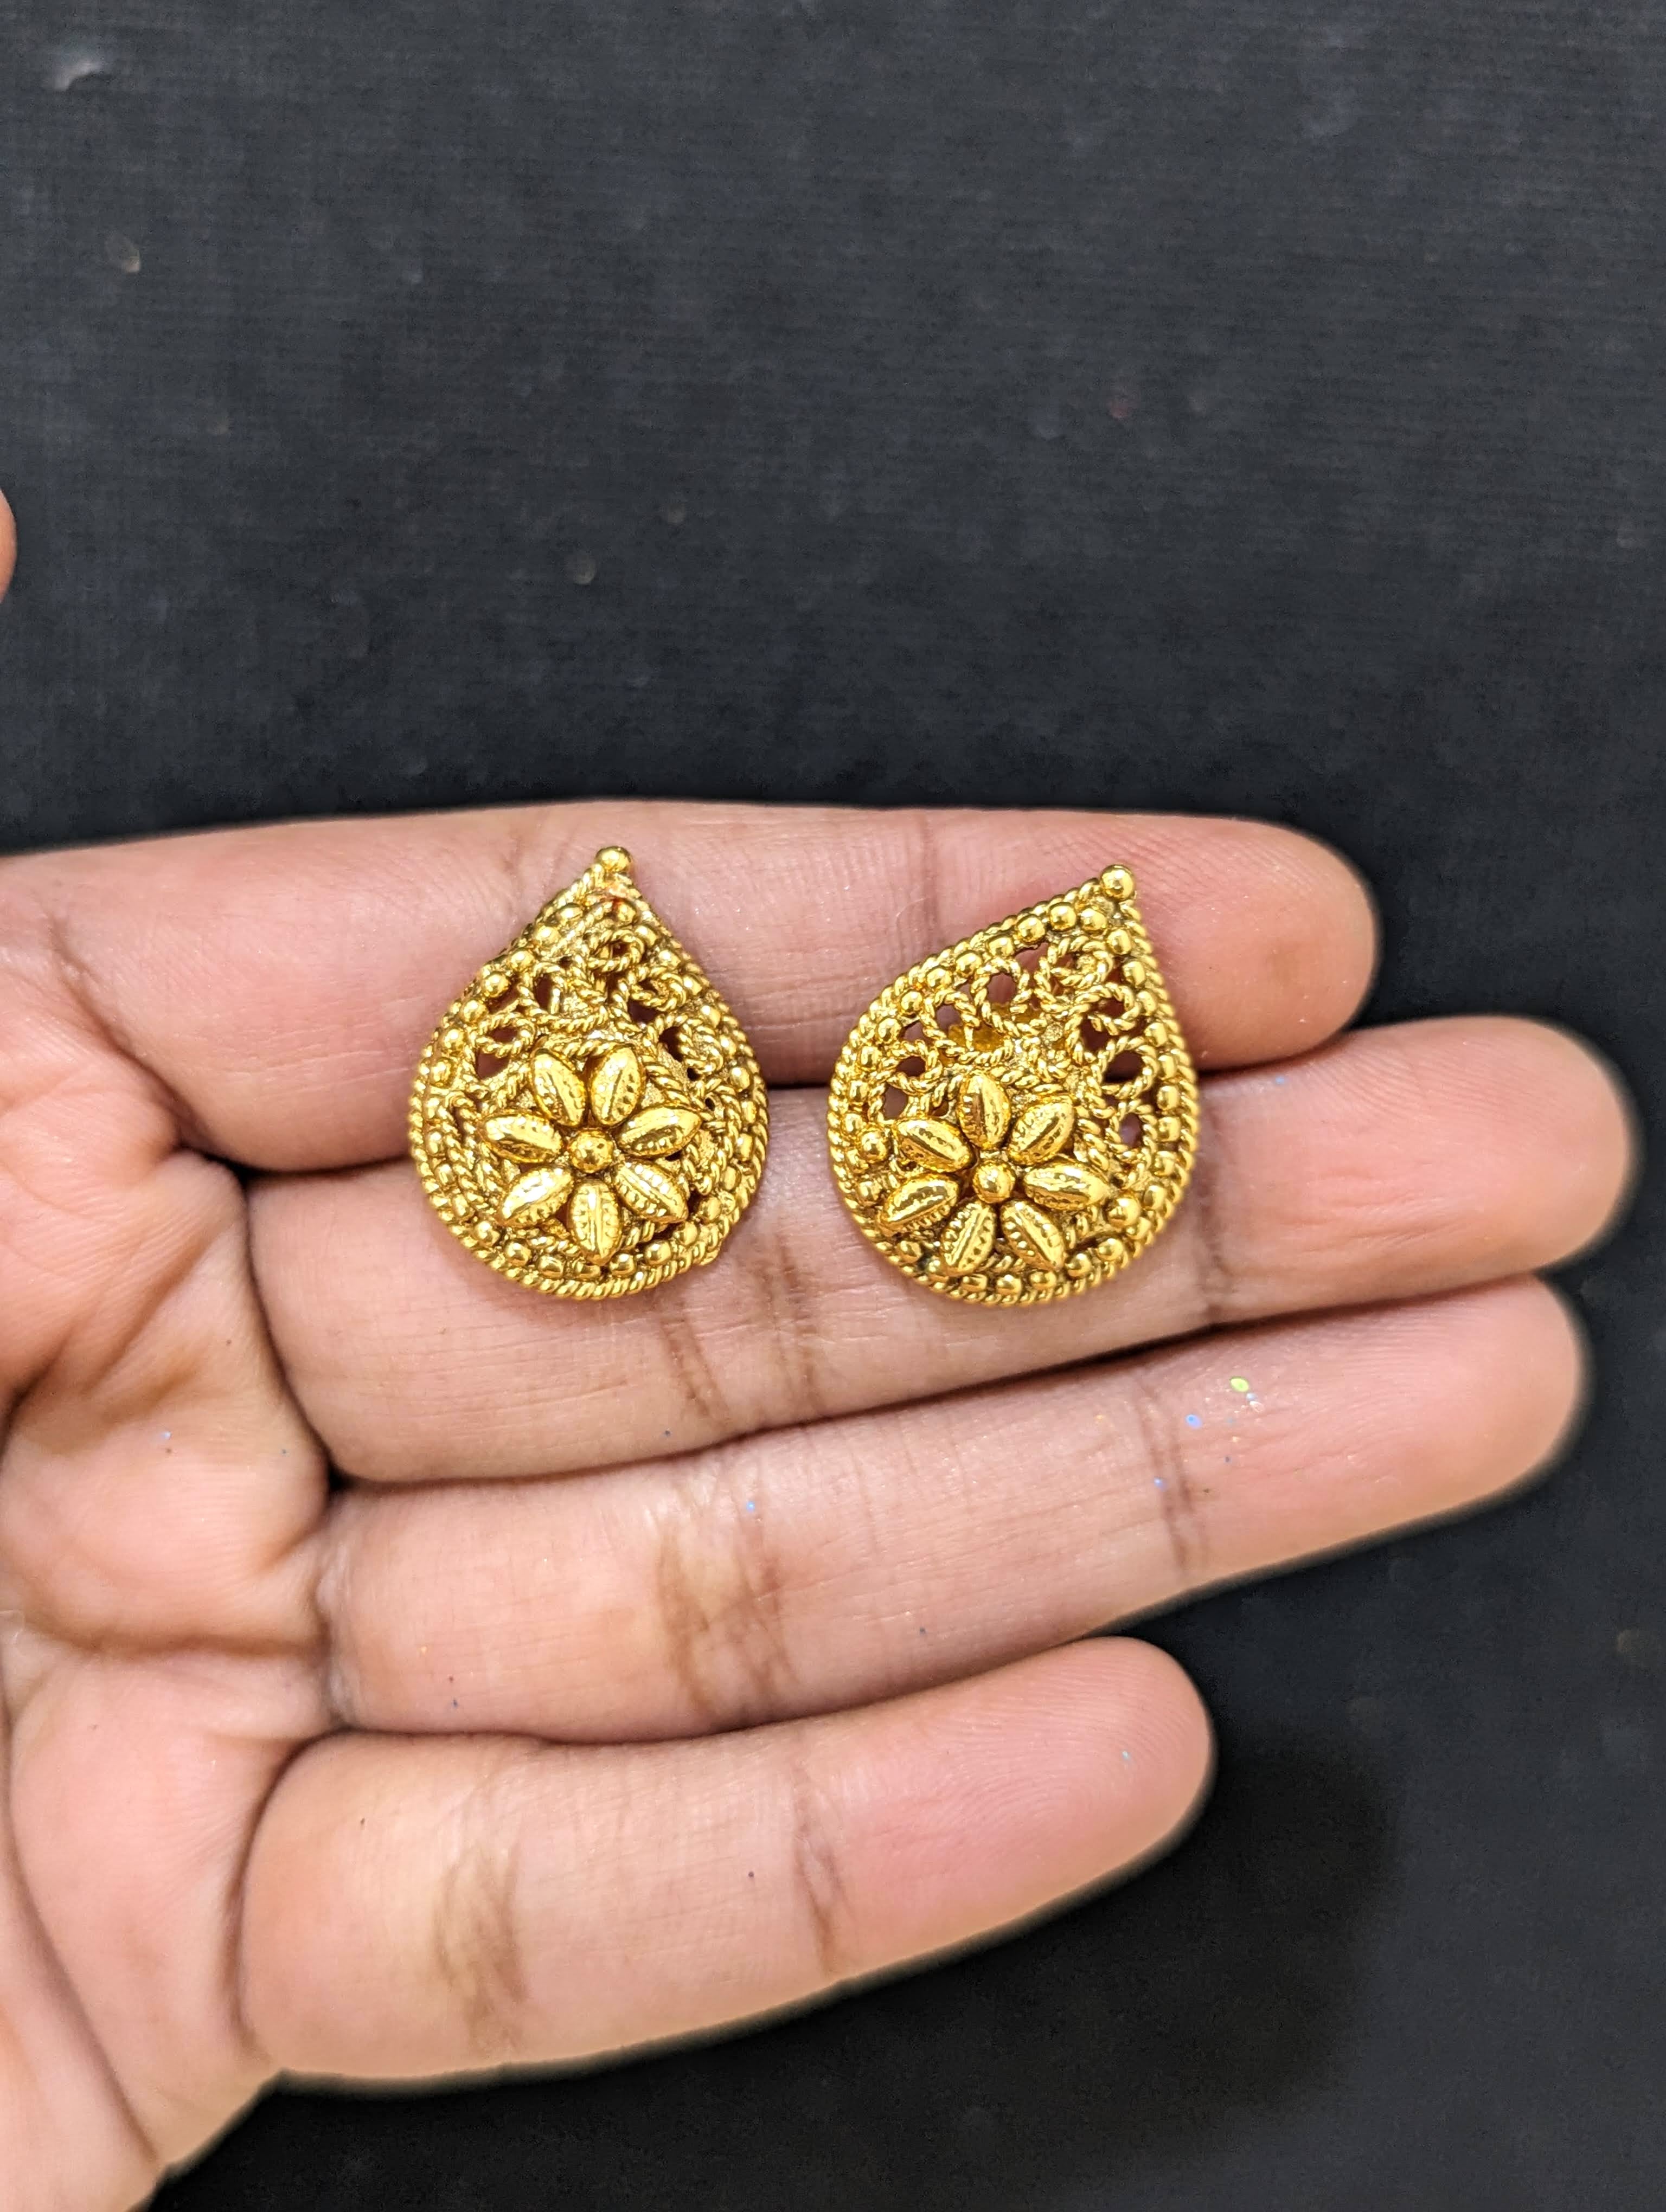 Buy Malabar Gold and Diamonds 22k Gold Earrings for Women Online At Best  Price @ Tata CLiQ